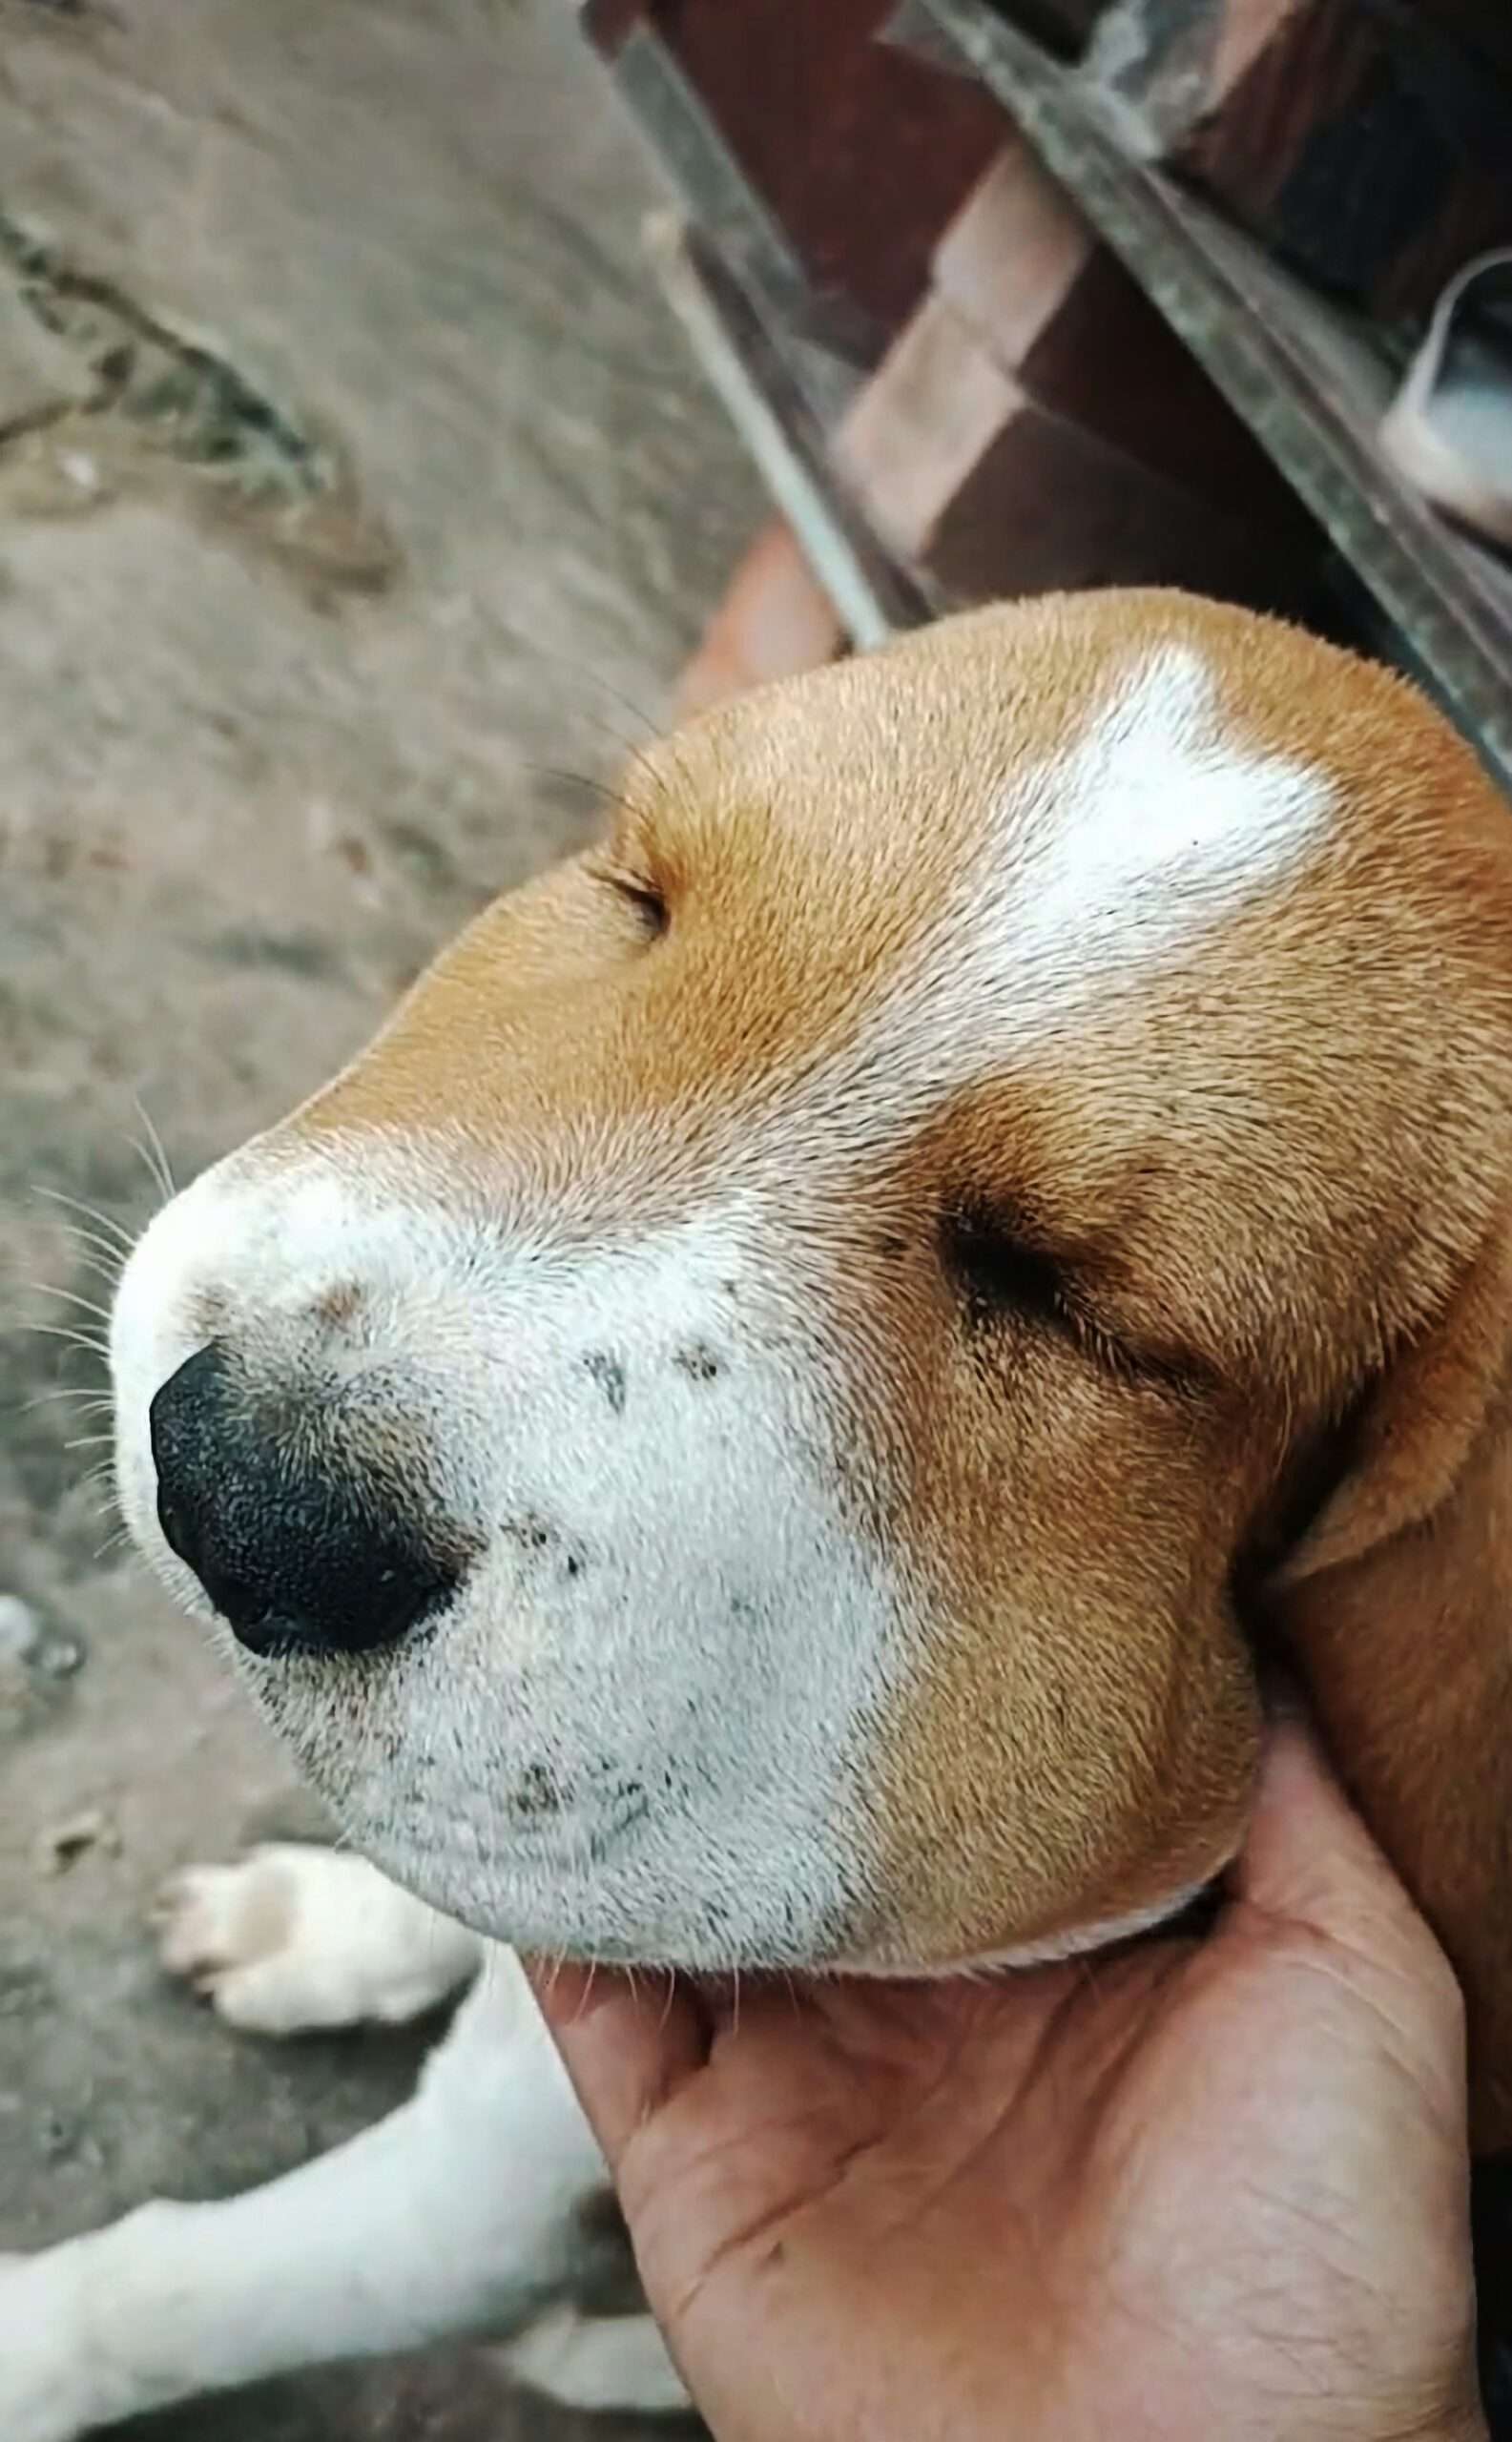 Read more about the article Puppy’s Face Swells Up Like Crazy After Snake Bite